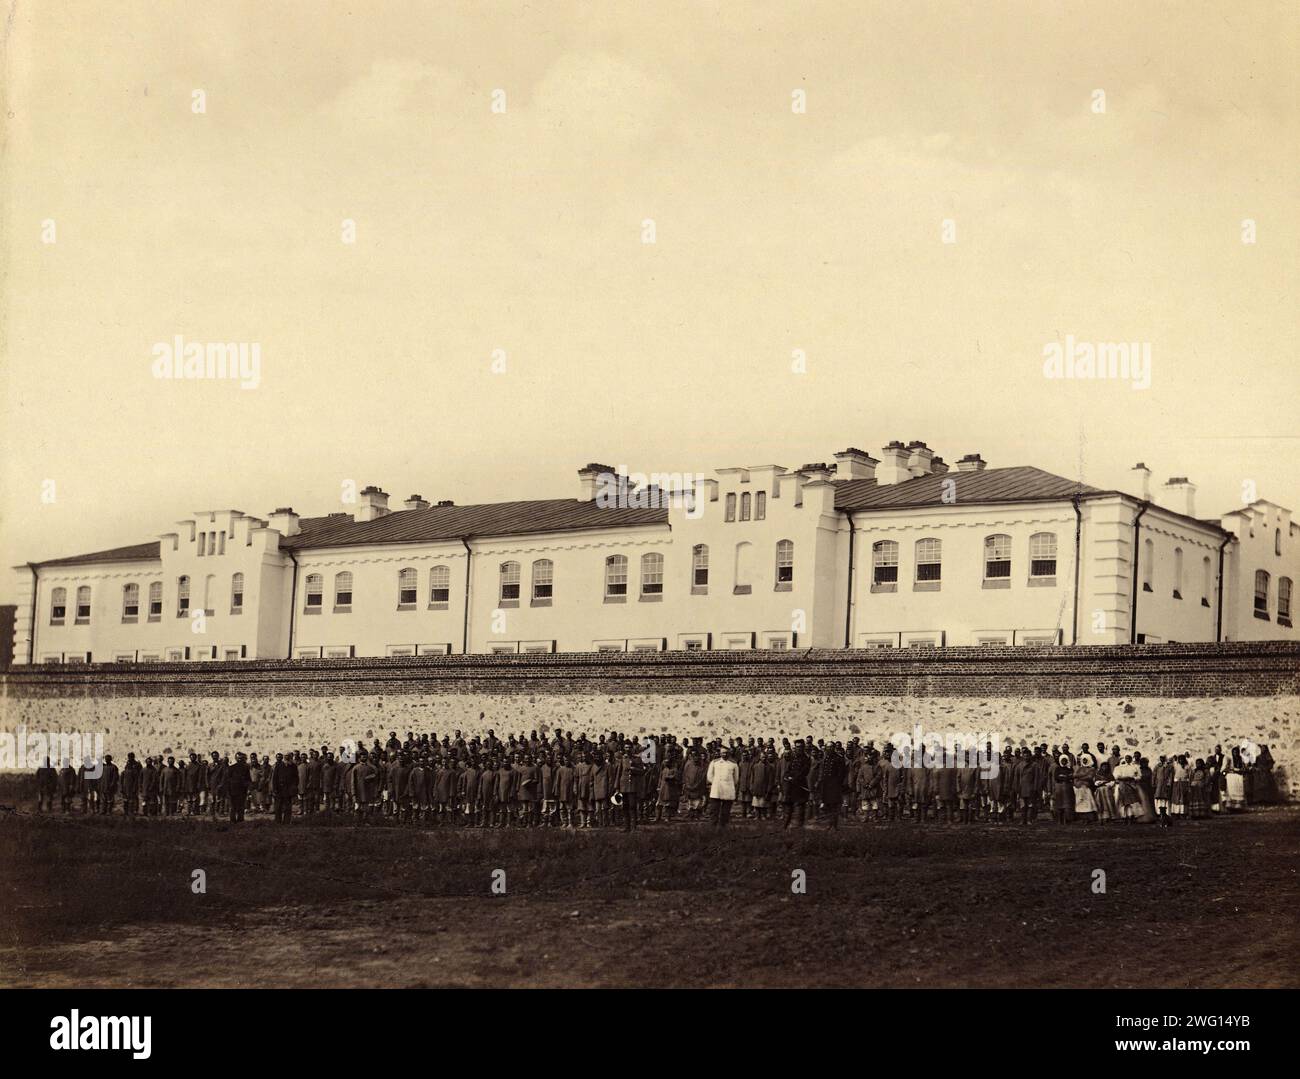 Internees Praying outside the Gornyi Zerentui Prison, 1891. One of 74 views taken in July 1891 and contained in the albumTipy i vidy Nerchinskoi katorgi (Views and inhabitants of Nerchinsk hard labor camps). The Nerchinskkatorgawas part of the katorga (forced labor) system of imperial Russia, located in the province of Transbaikalia (present-day Zabaykal'skiy Kray), near the Russian border with China. The katorga was administered by the Ministry of Interior and included prisons at Akatuy, Kara, Aleksandrovsk, Nerchinskii Zavod, and Zerentuy, all of which are depicted in the album. National Lib Stock Photo